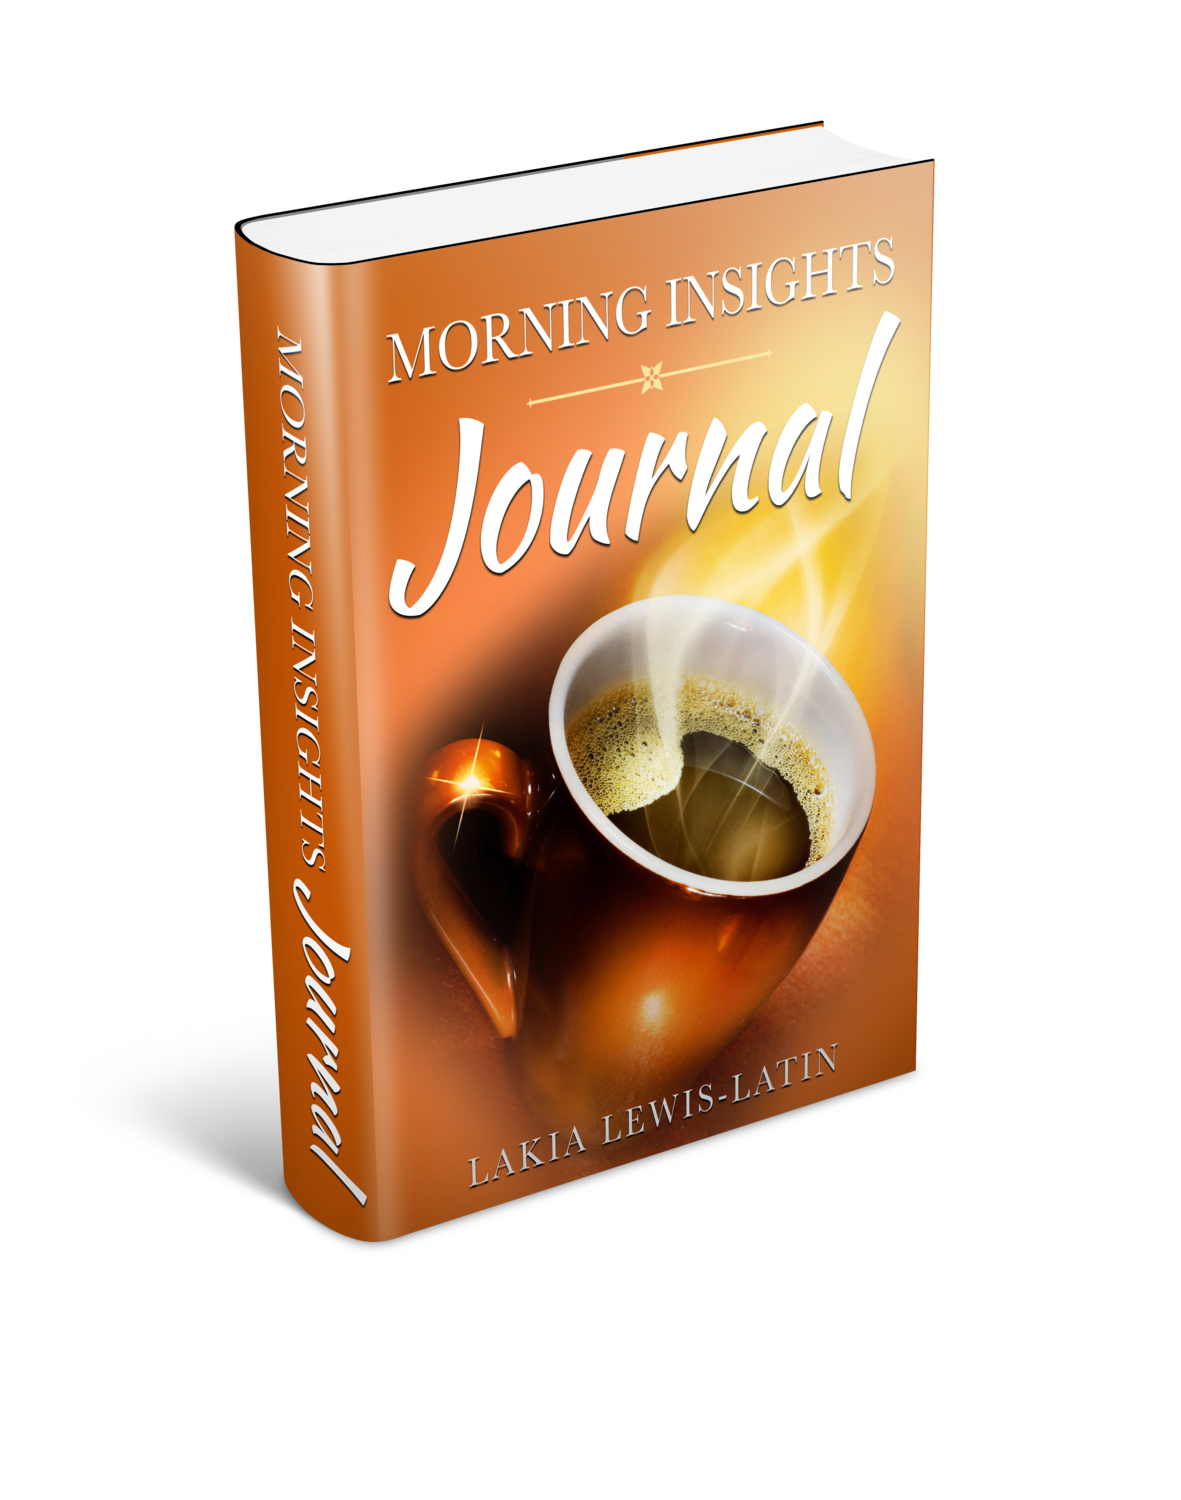 Morning Insights Journal